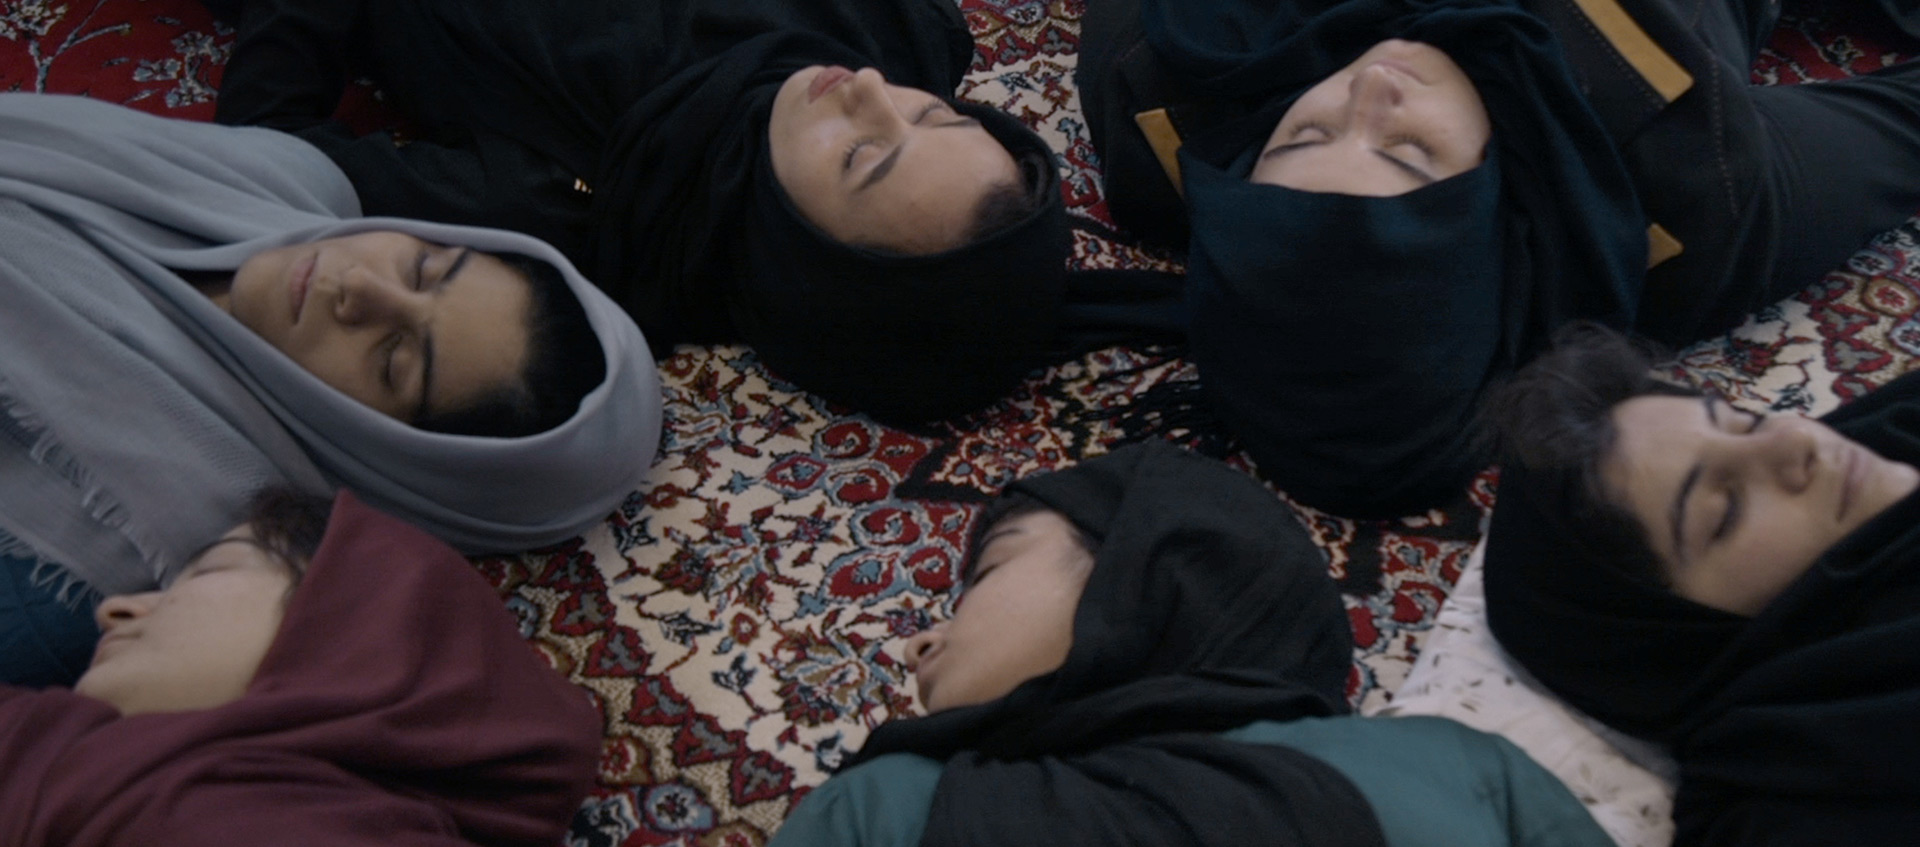 A view of six women in hijabs lying with eyes closed on a carpet